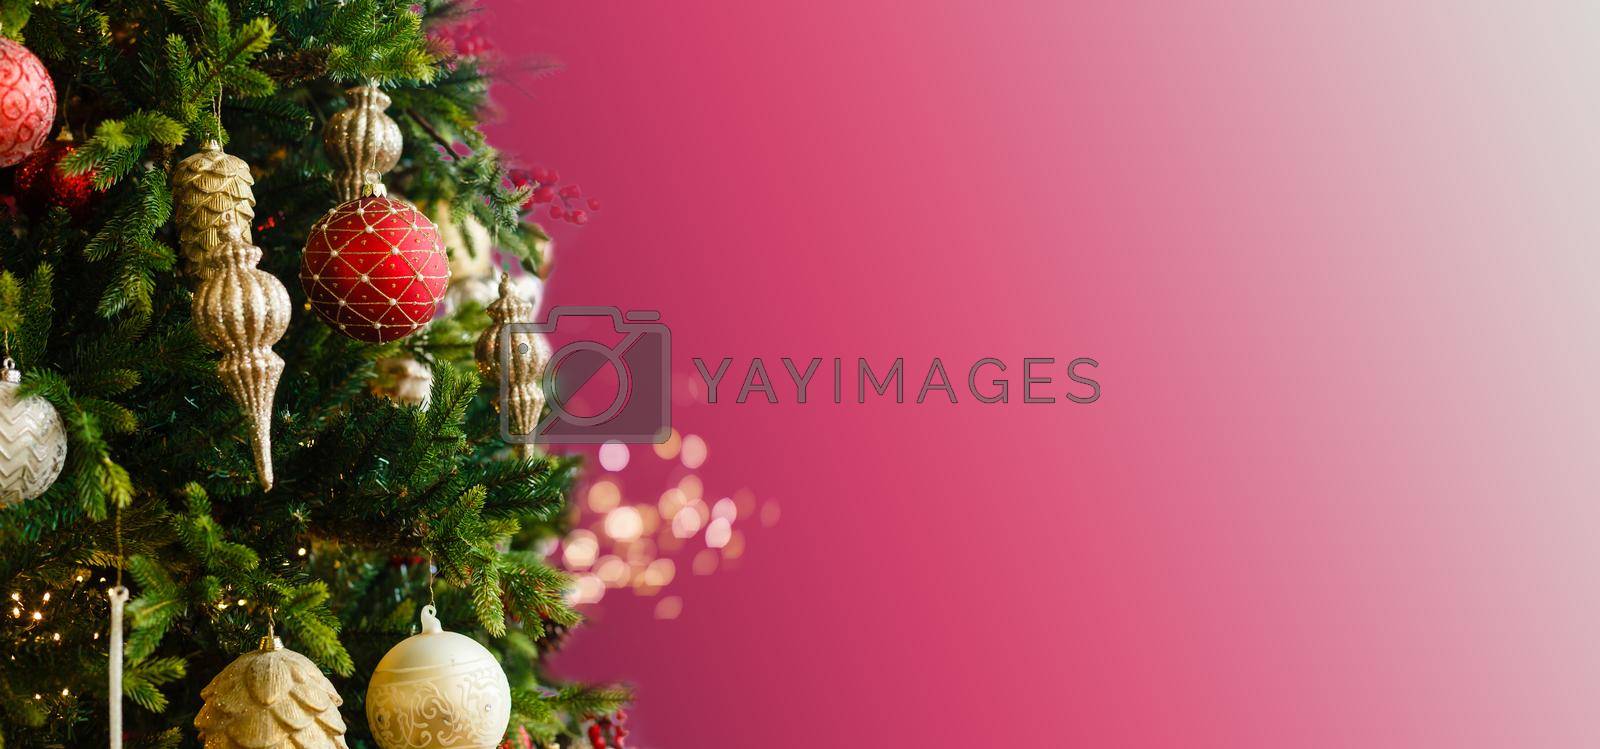 Royalty free image of Decorated Christmas tree closeup, balls, garland by Andelov13